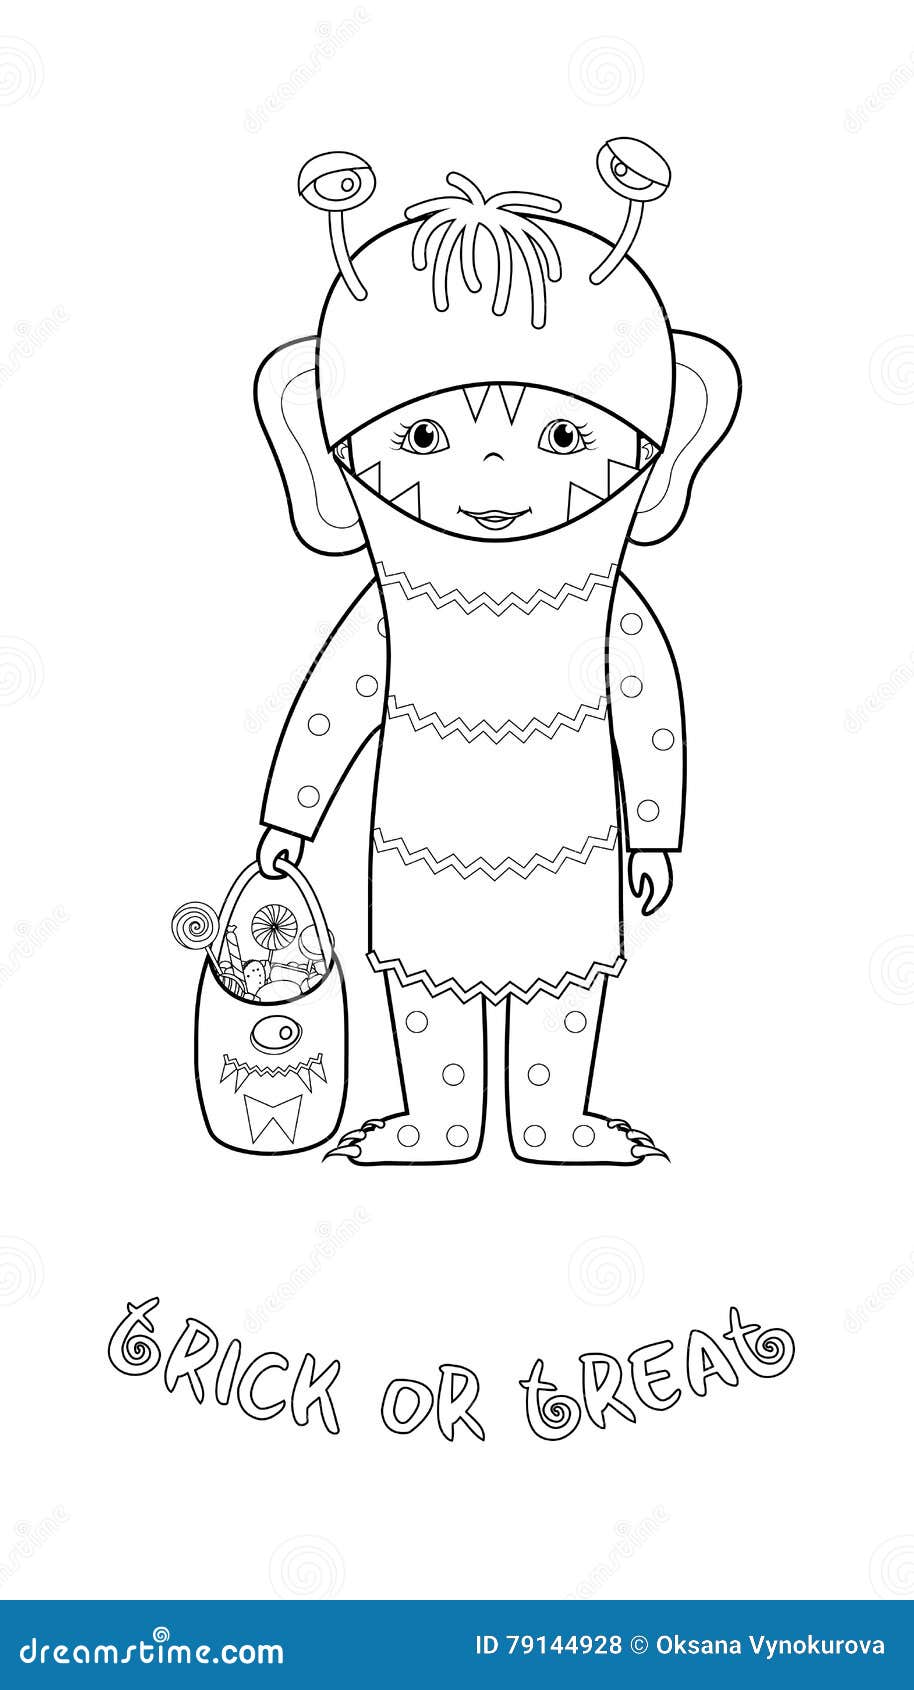 Halloween coloring page with cute monster stock vector